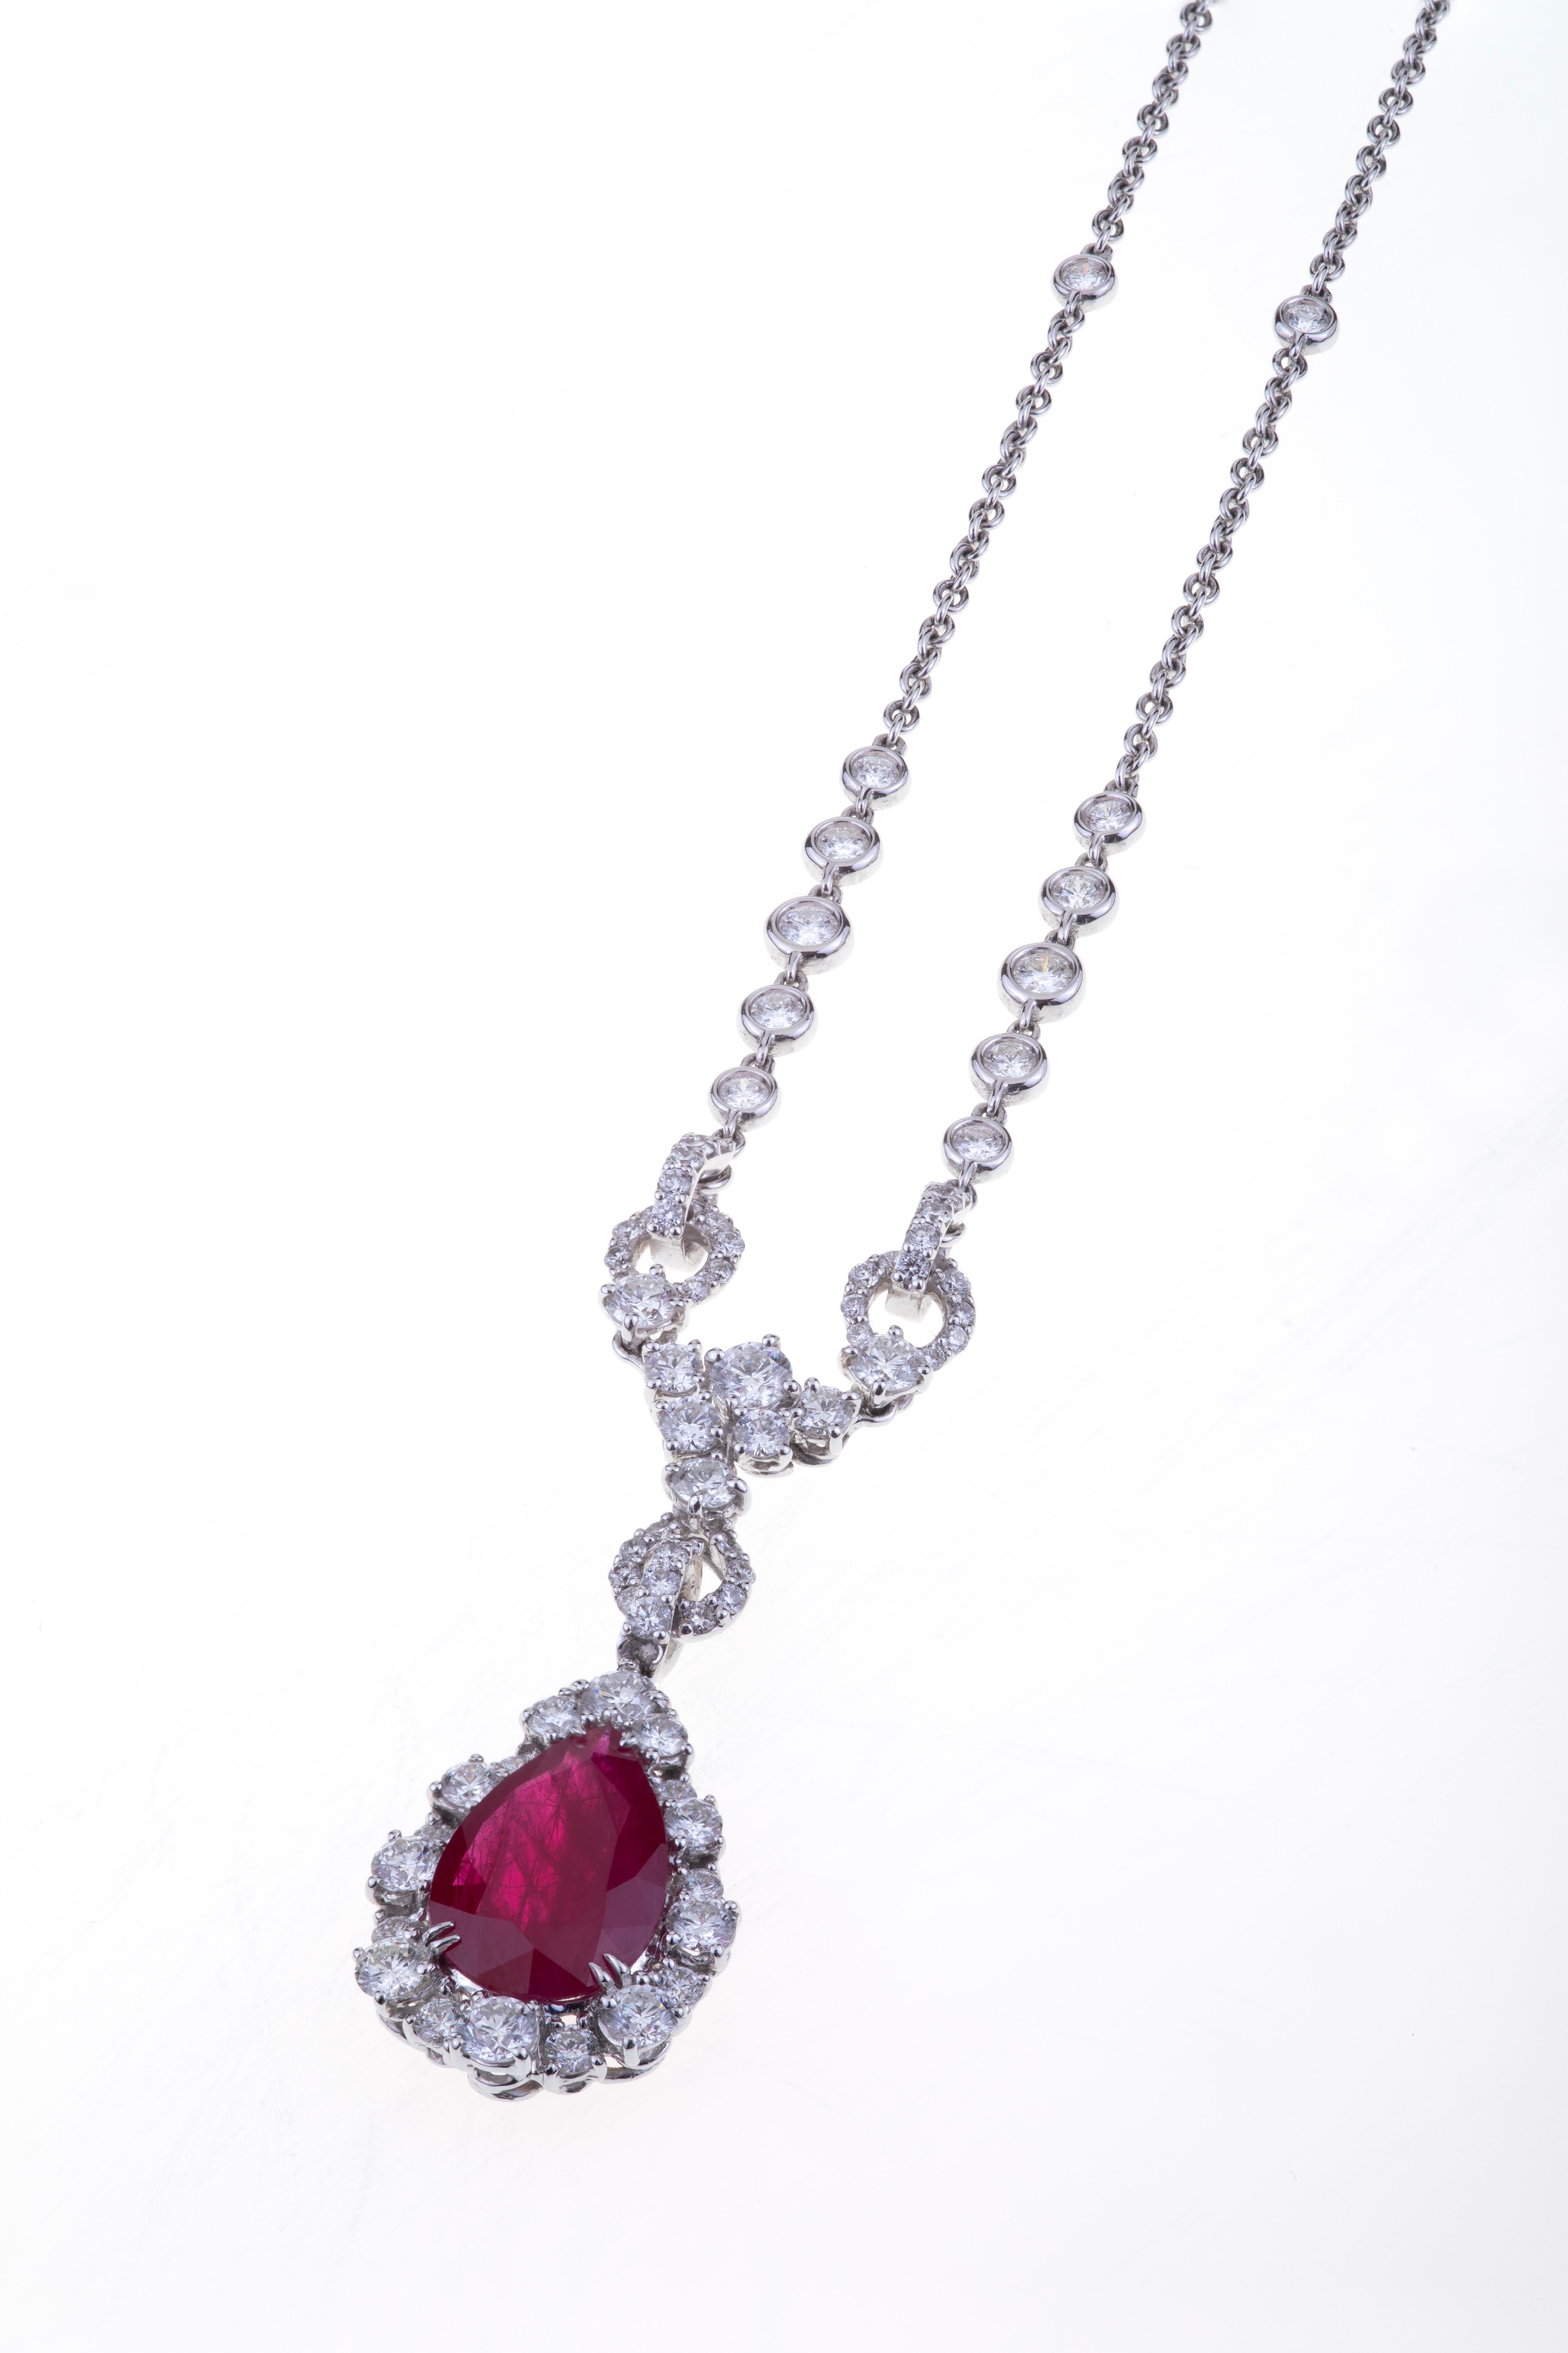 Pendant Drop Cut Ruby ct. 3.57, Diamonds Setting like a Royal Blood.
Delicious Cut, Proportion and Brightness for the Ruby ct. 3.57 Vivid Red Pear-Shape Transparent.
Diamonds around the Ruby and on the Chain are ct. 2.89 and Give to this Piece of